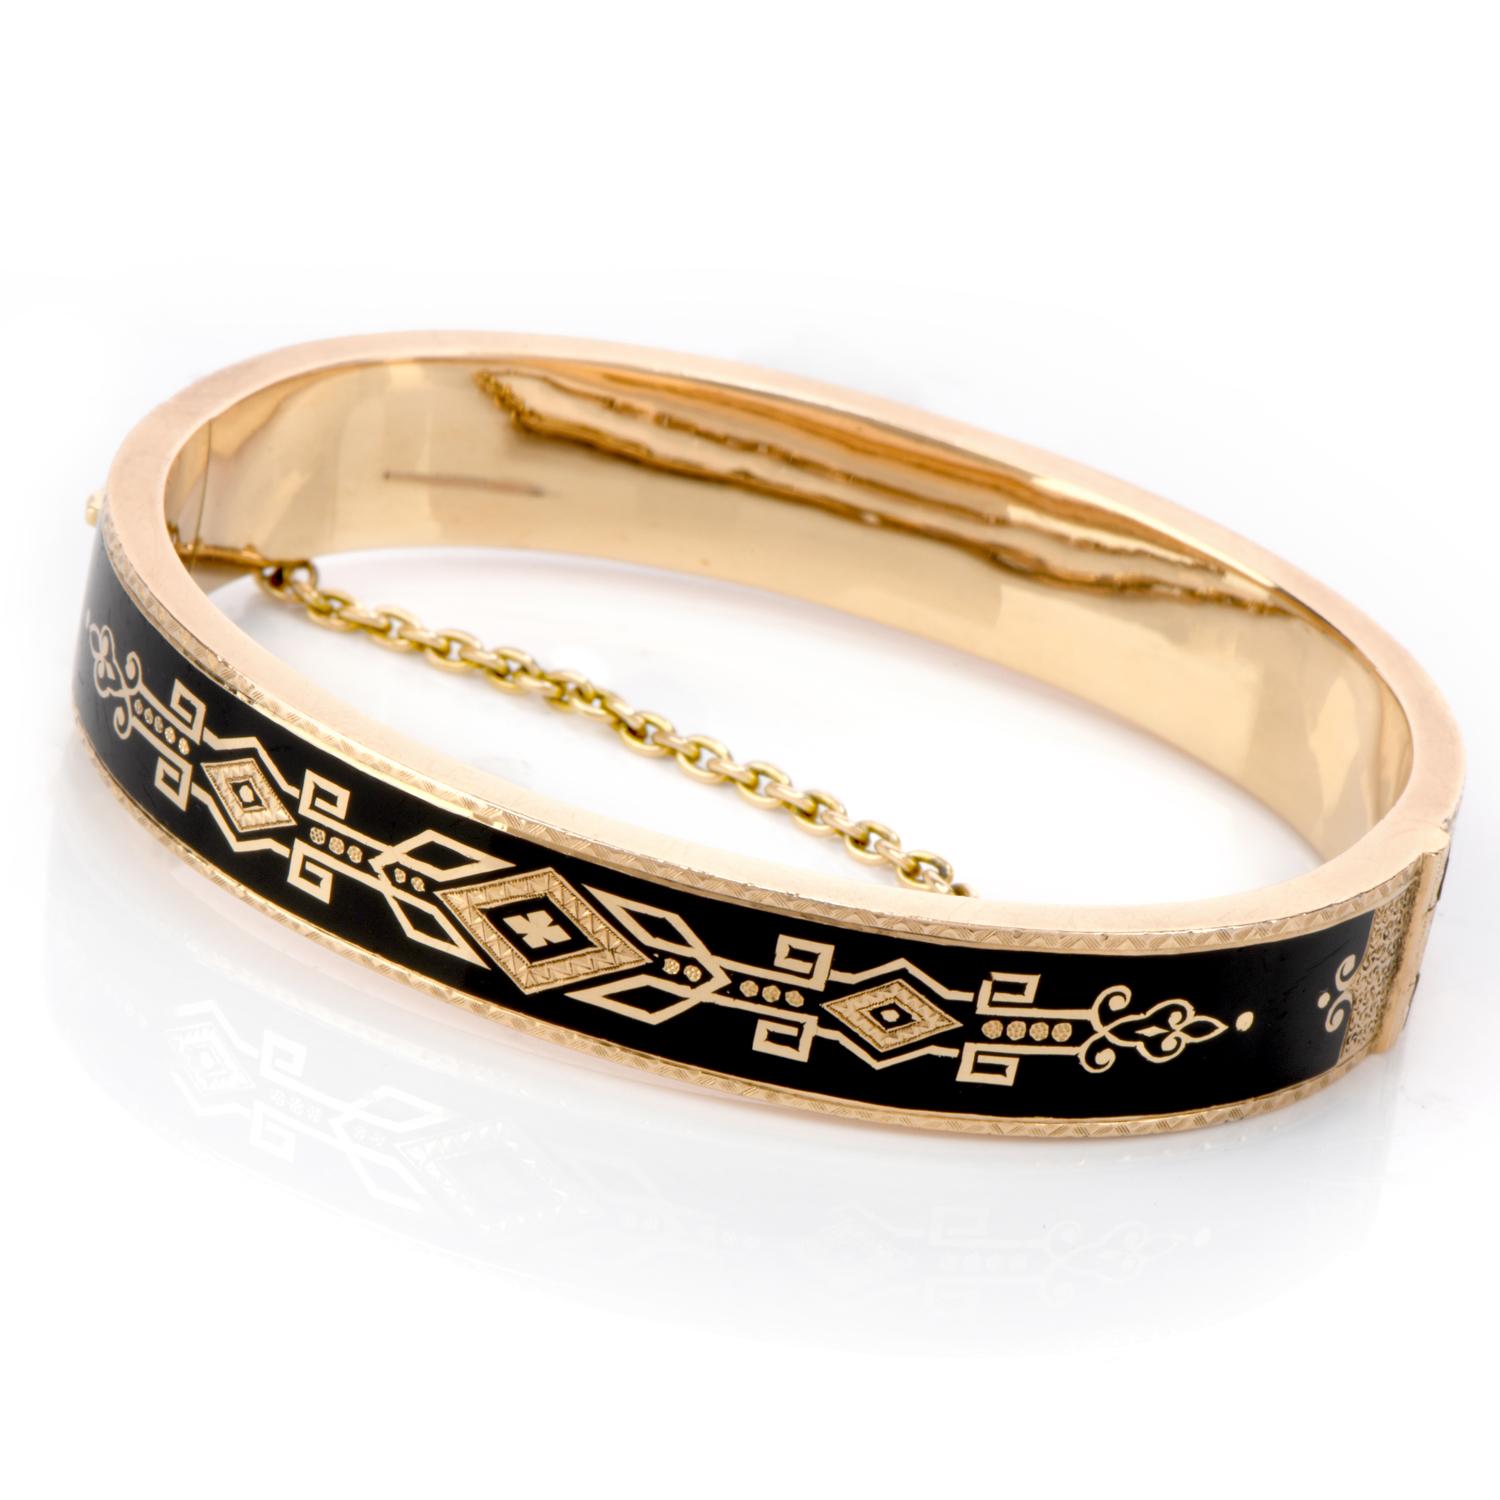 Honor the beloved Victorian Era with this Antique Black Enamel 14K yellow Gold Bangle Bracelet!

This bracelet displays a beautiful and intricate Victorian design on the deep black enamel background.  It weighs in at 16.2 grams and measures at a 6